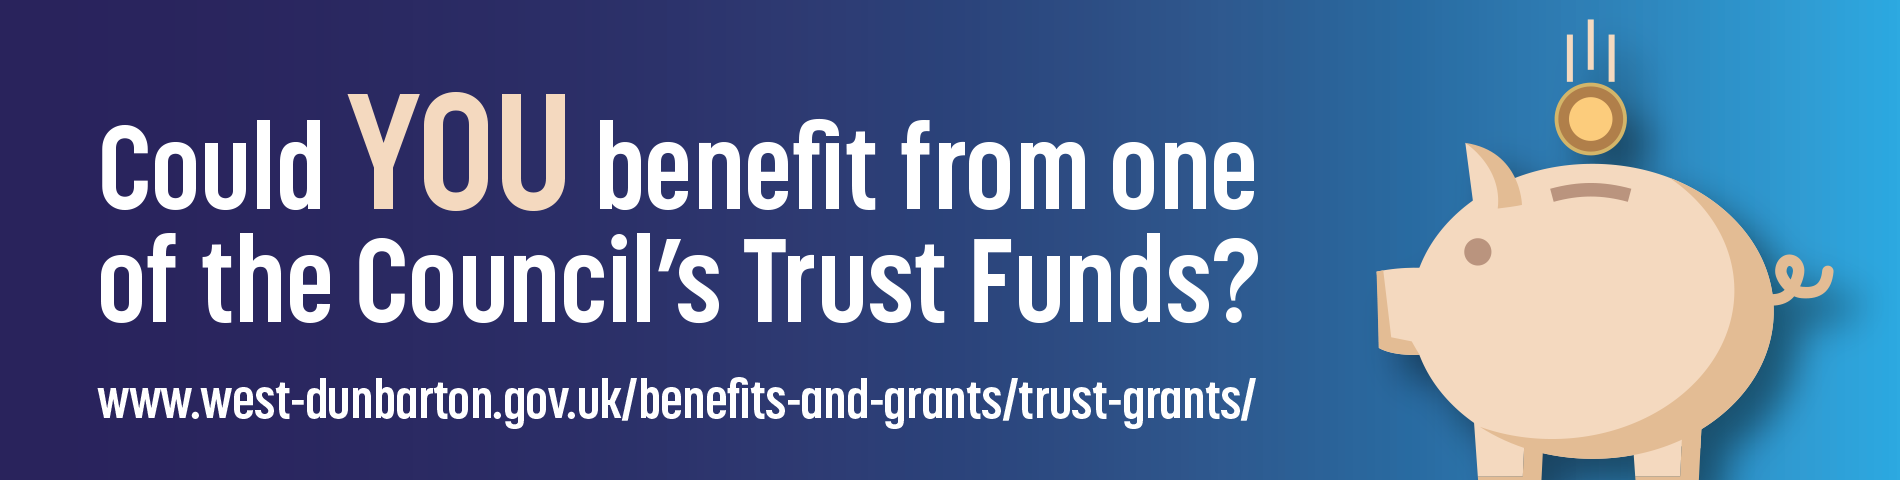 Advert for Trust Fund Applications